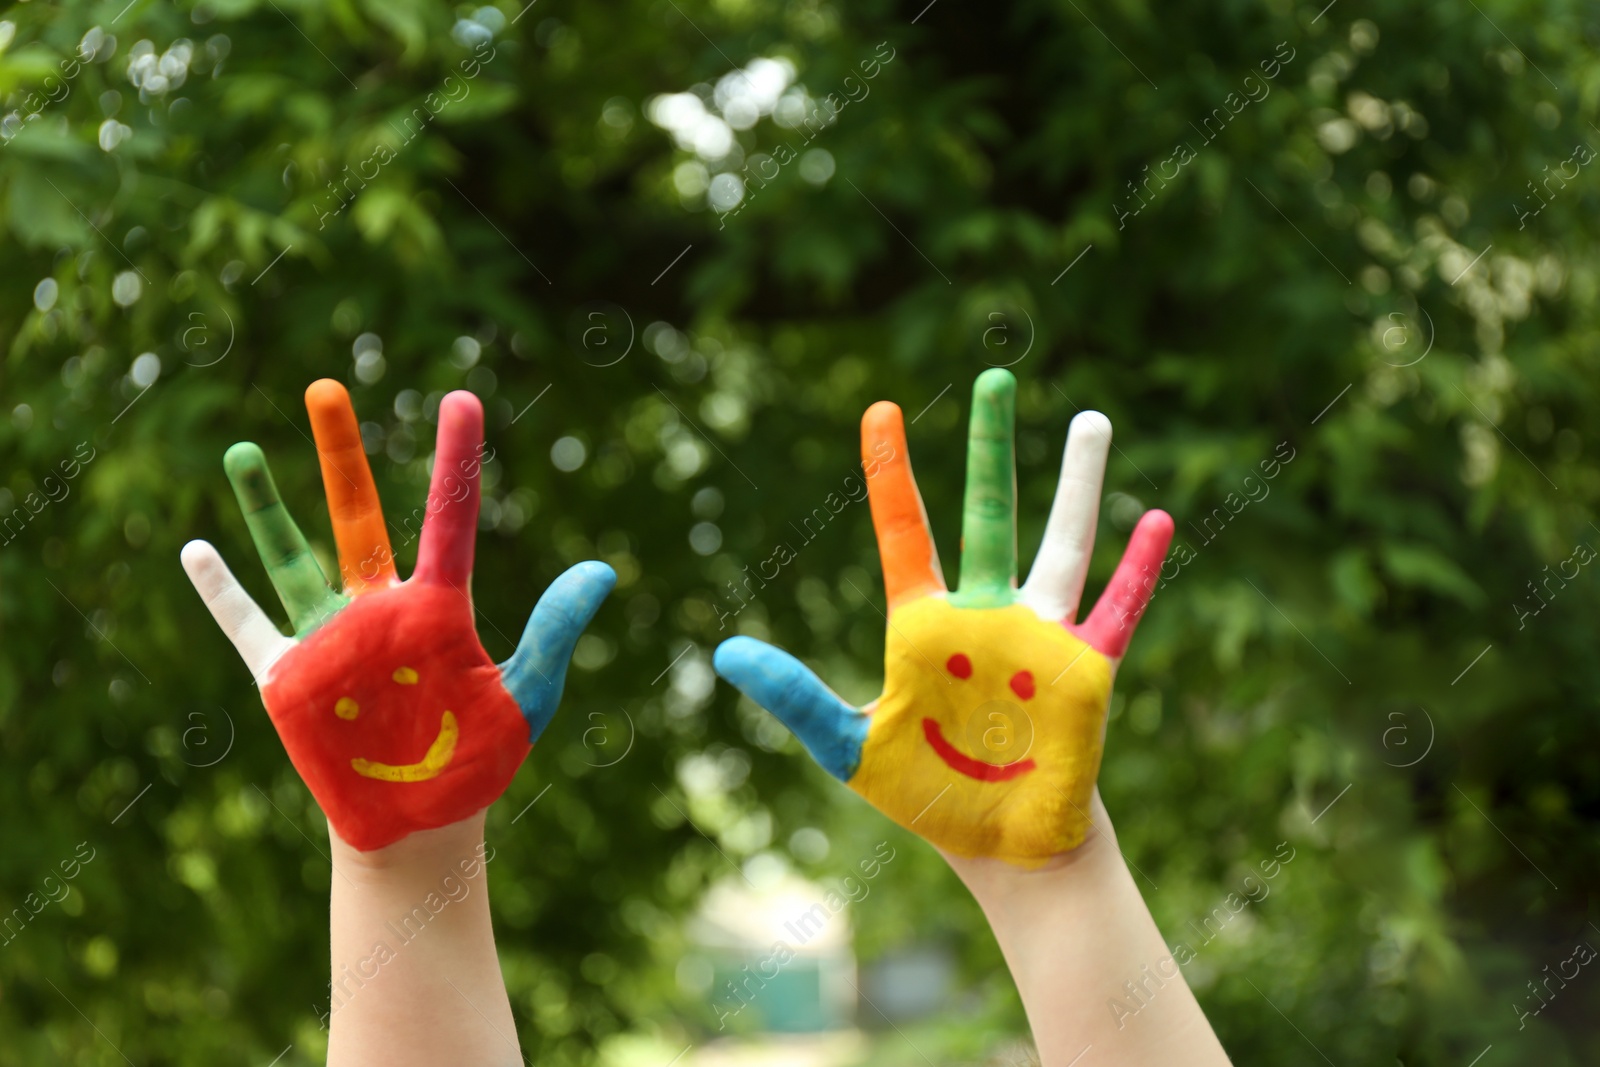 Photo of Kid with smiling faces drawn on palms in green park, closeup